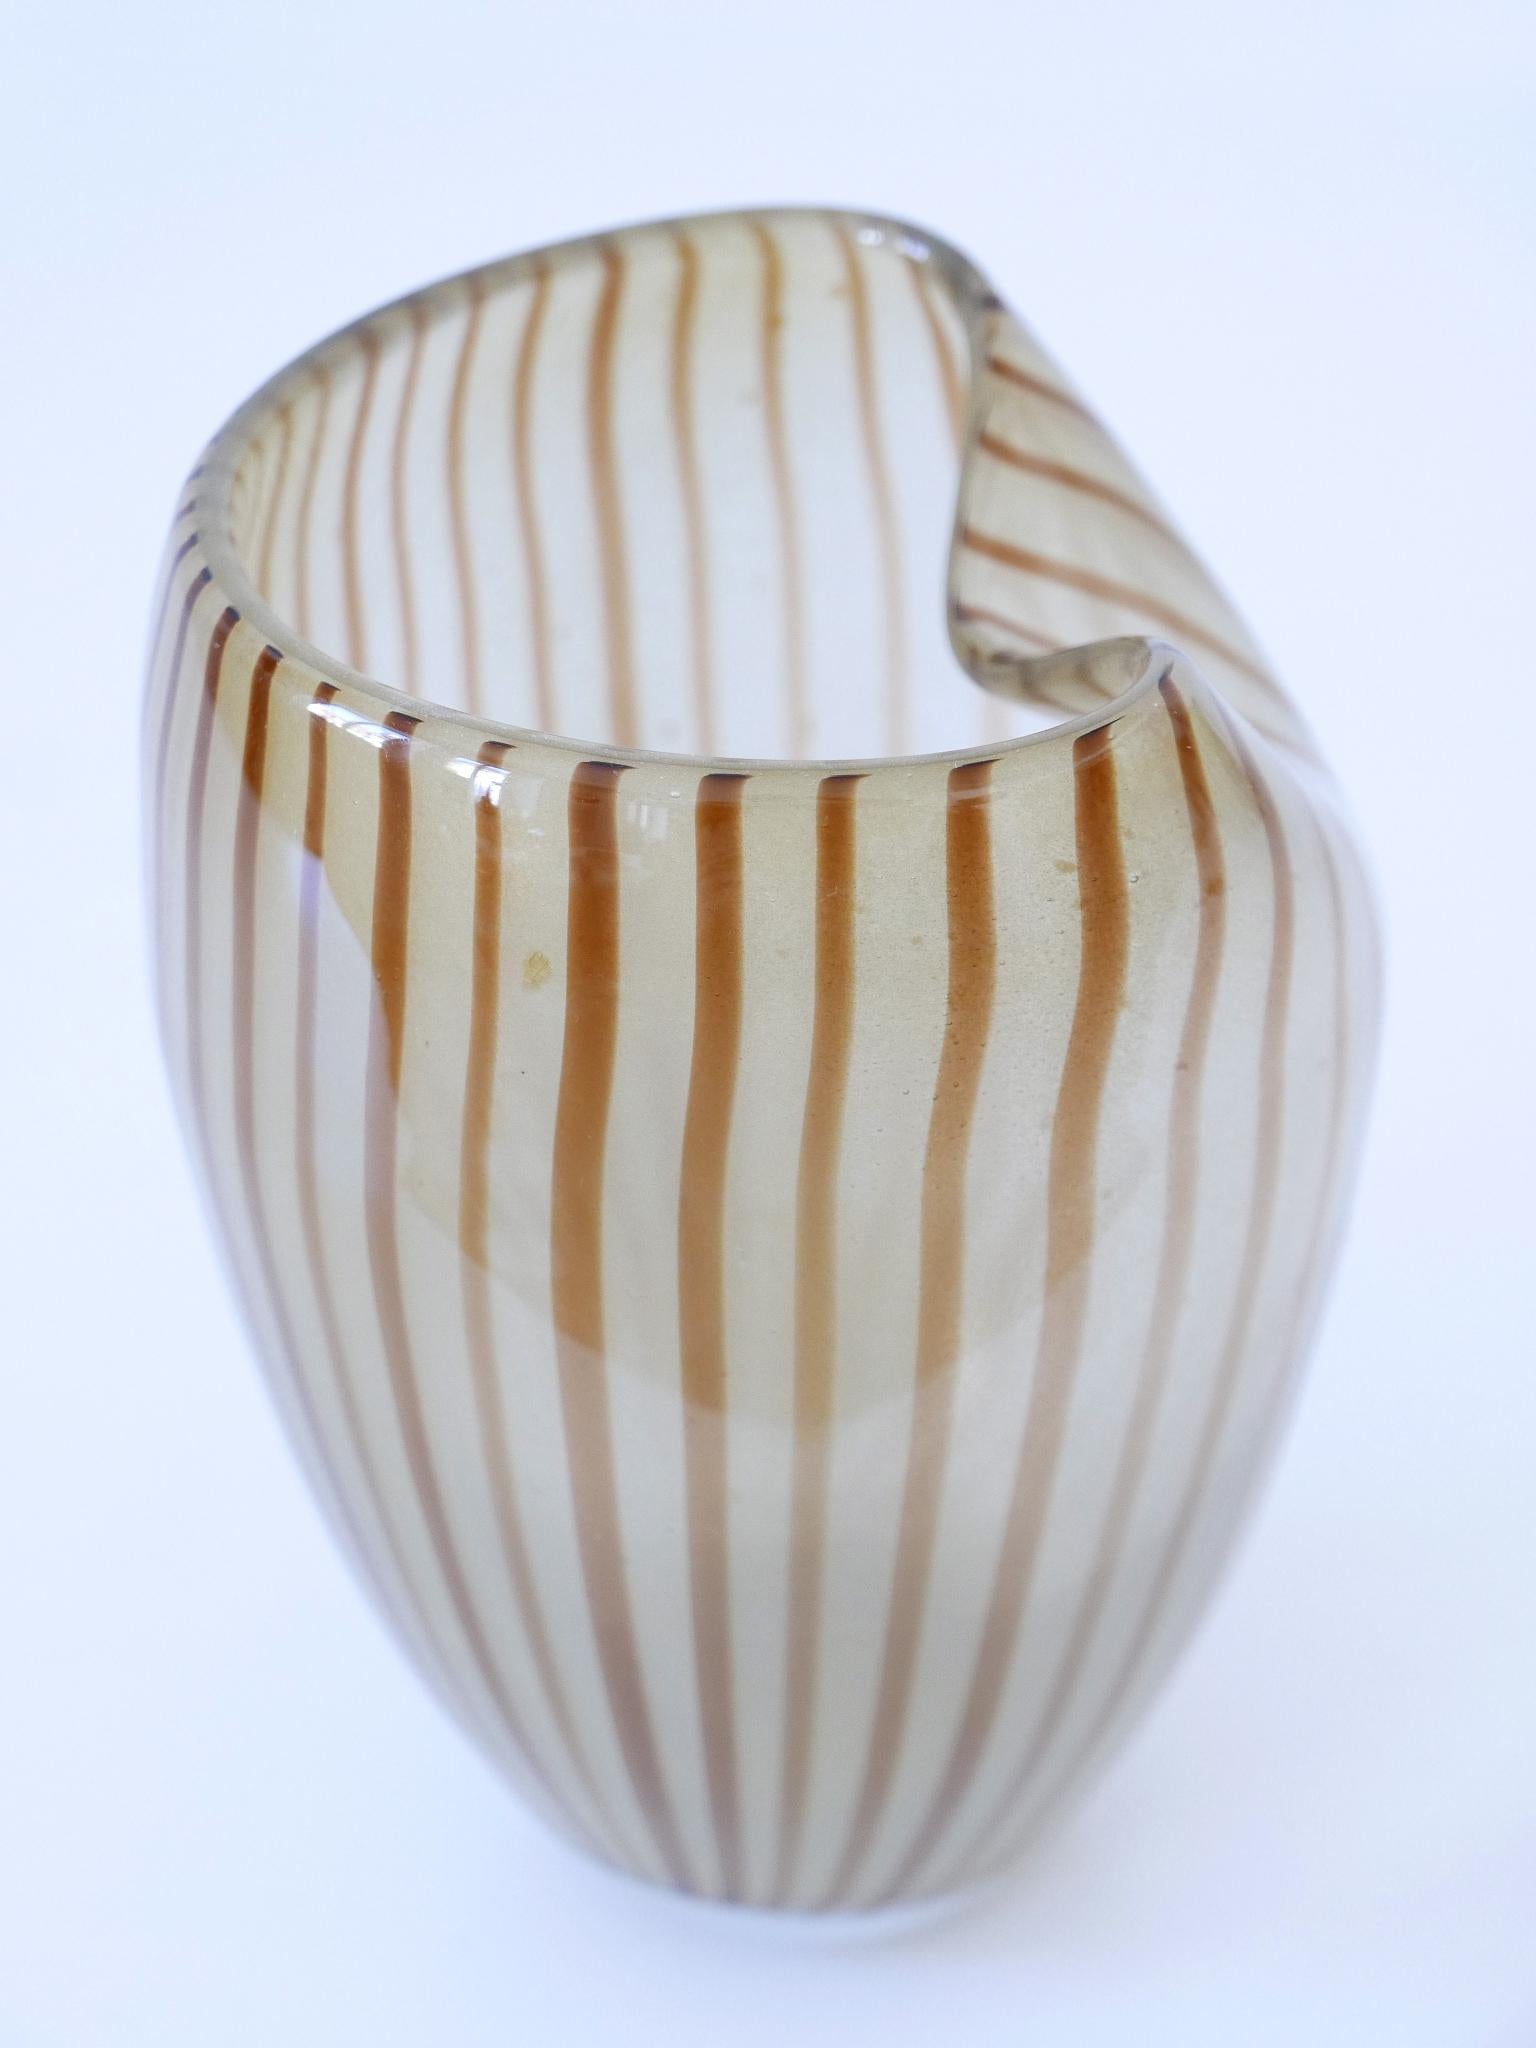 Decorative Mid Century Modern Murano Glass Vase Italy 1960s  For Sale 8